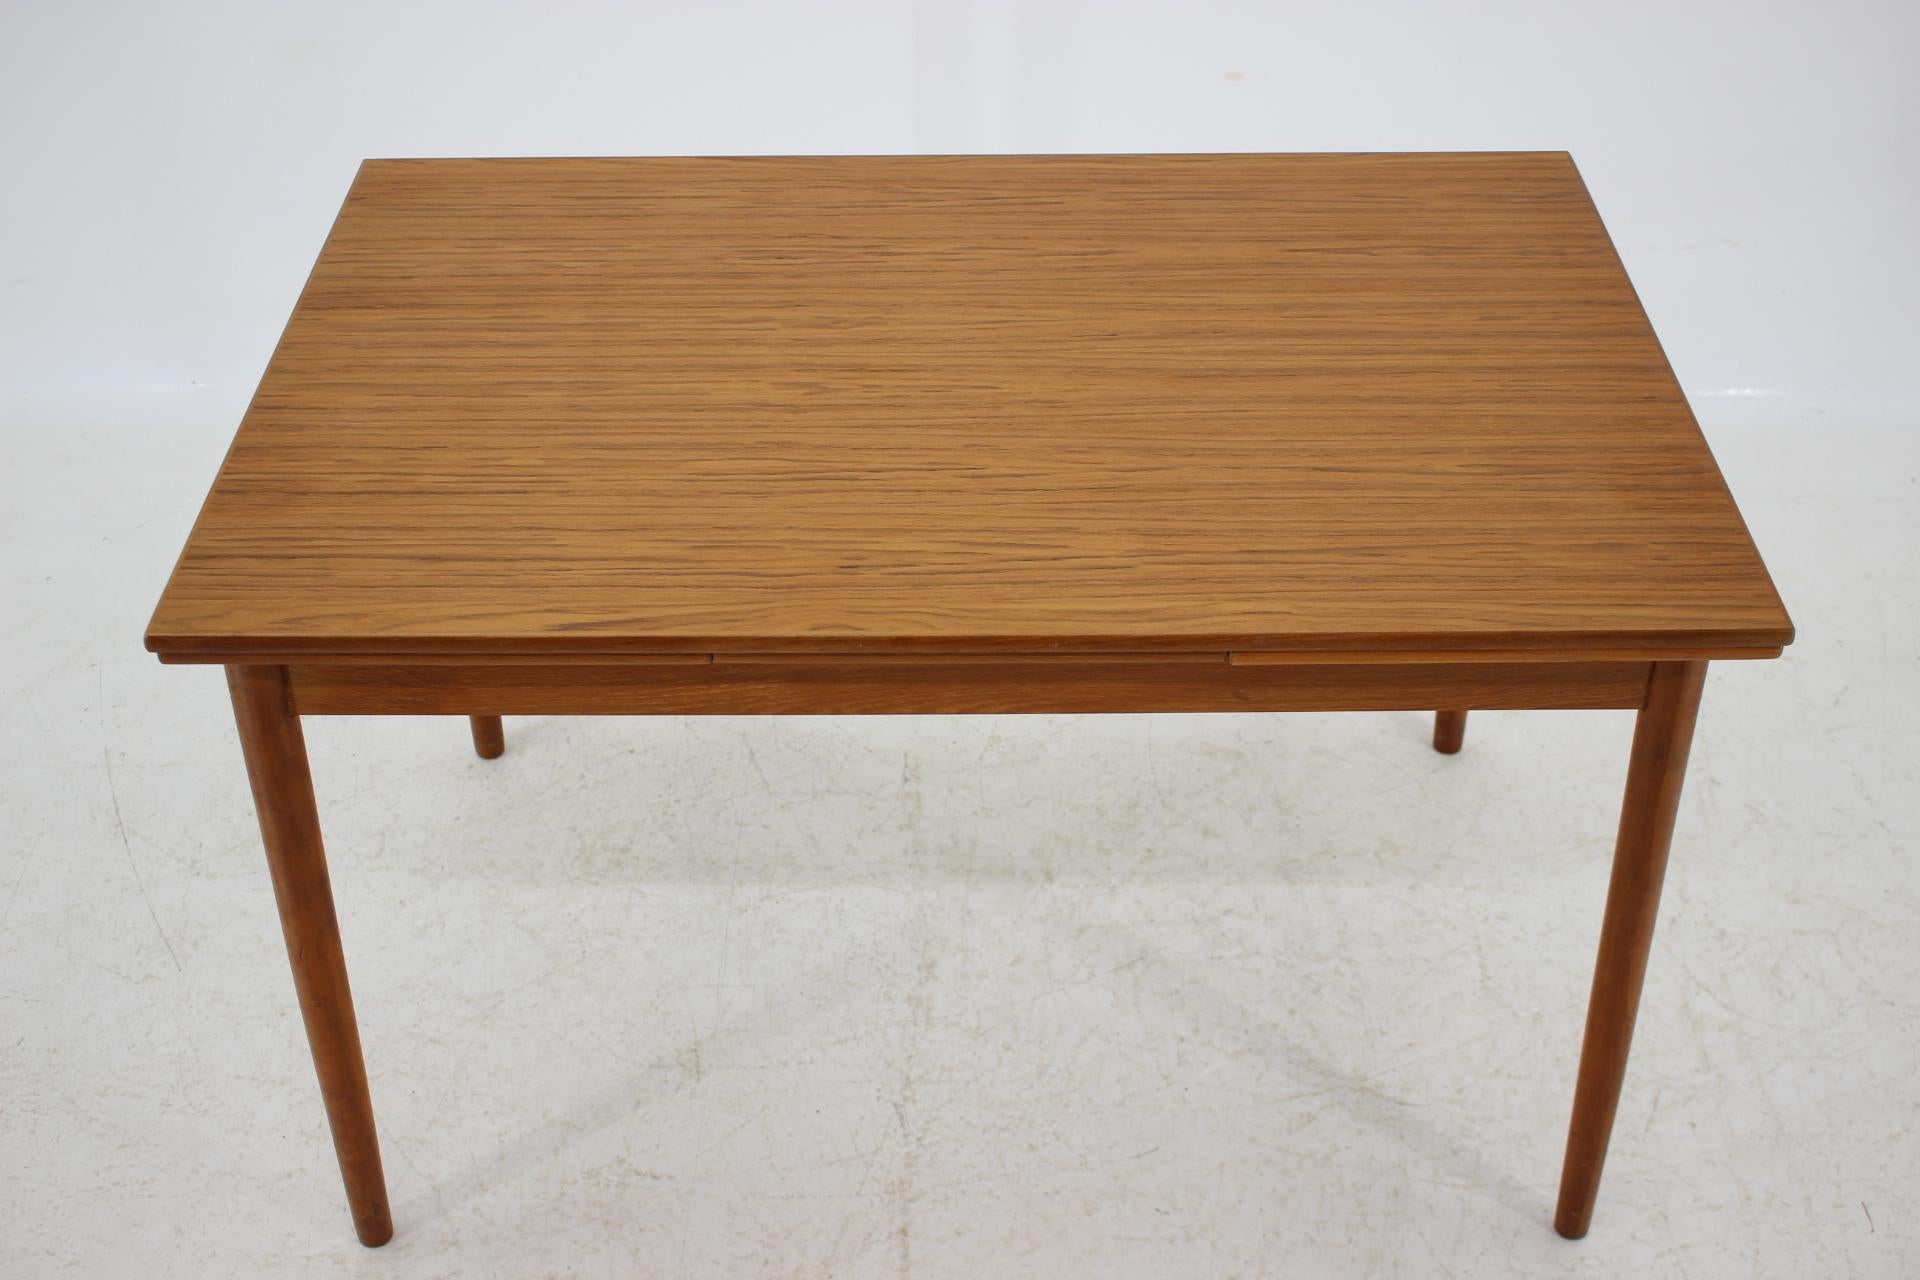 - Made in Denmark
- Made of teak
- Restored
- Extendable width 202 cm
- Very good condition.